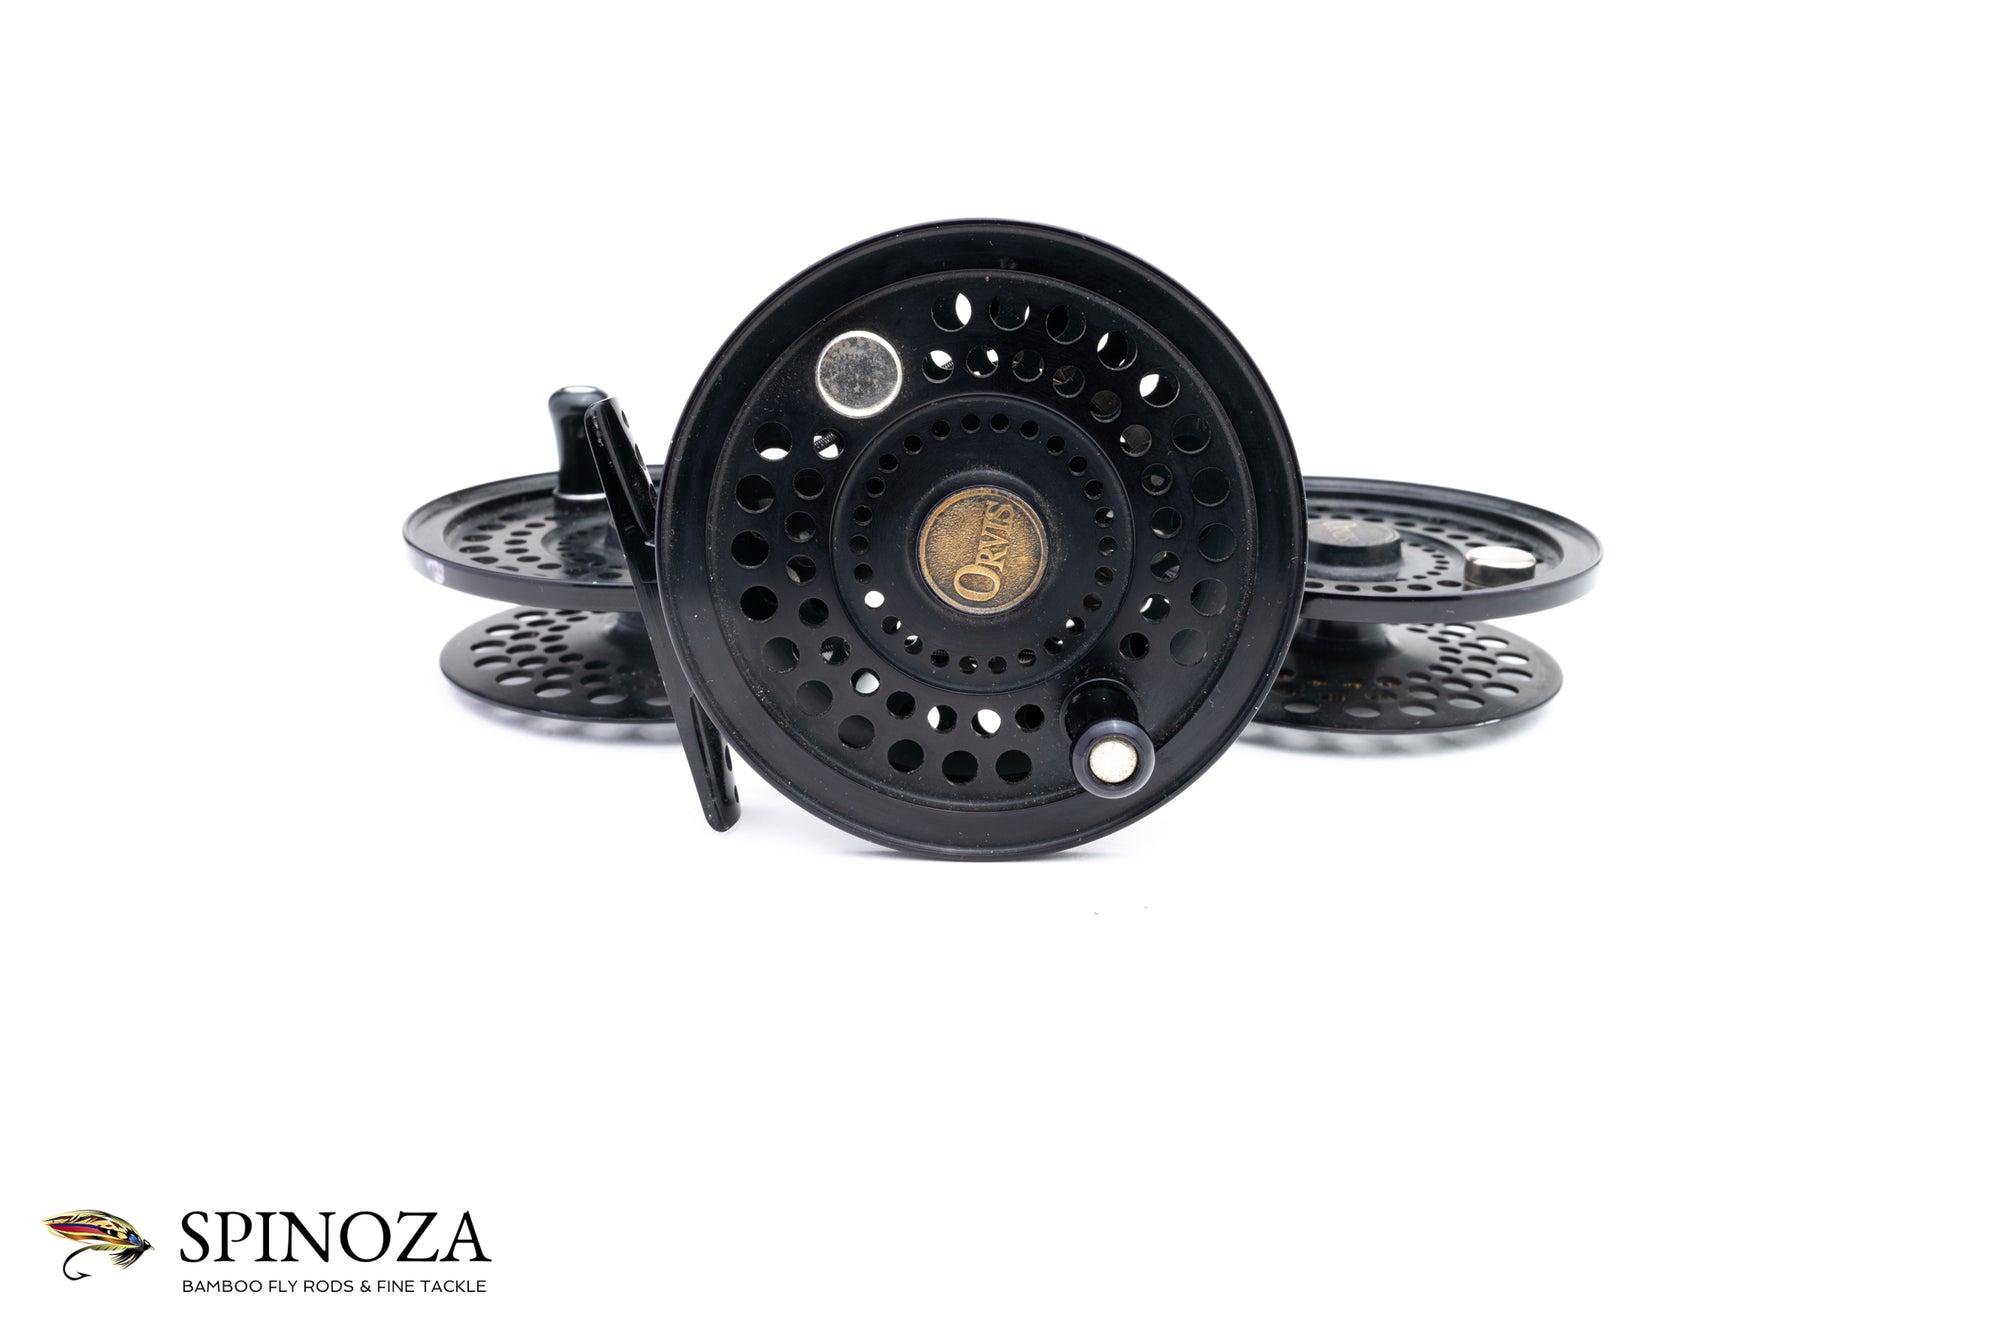 Orvis EXR Presentation III Fly Reel with 2 Spare Spools